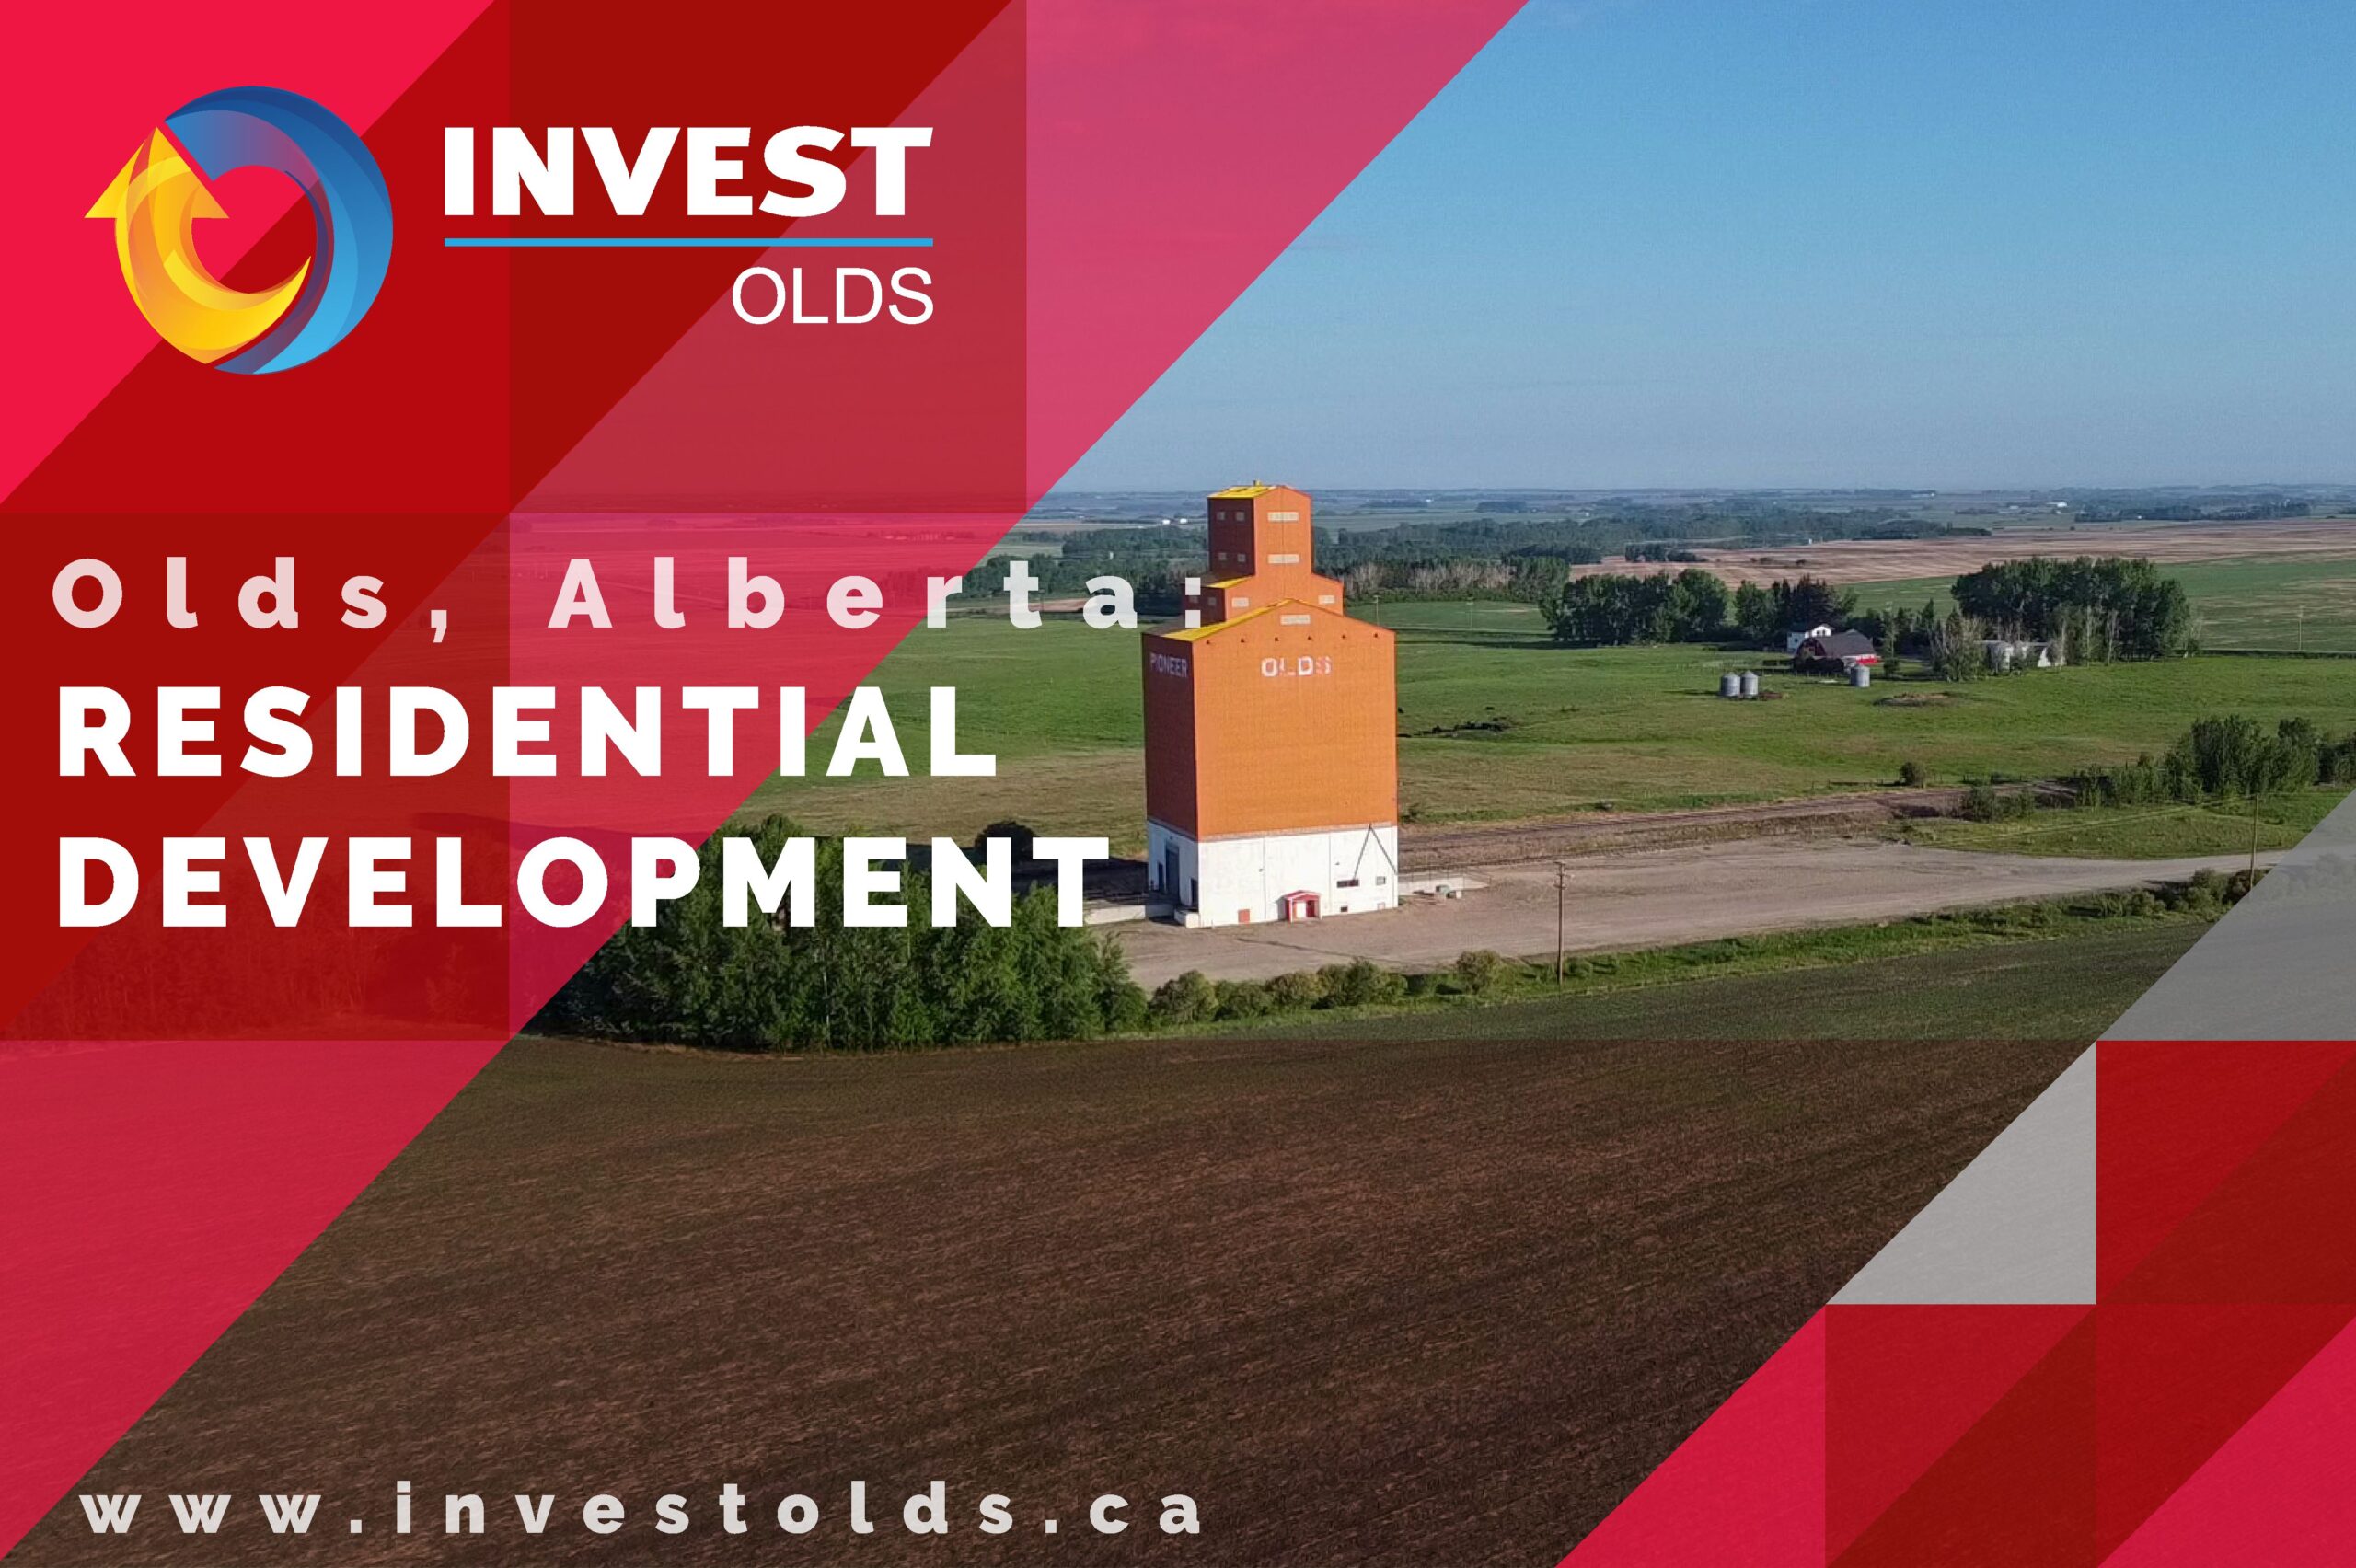 Olds, Alberta - a hotbed for imminent residential development